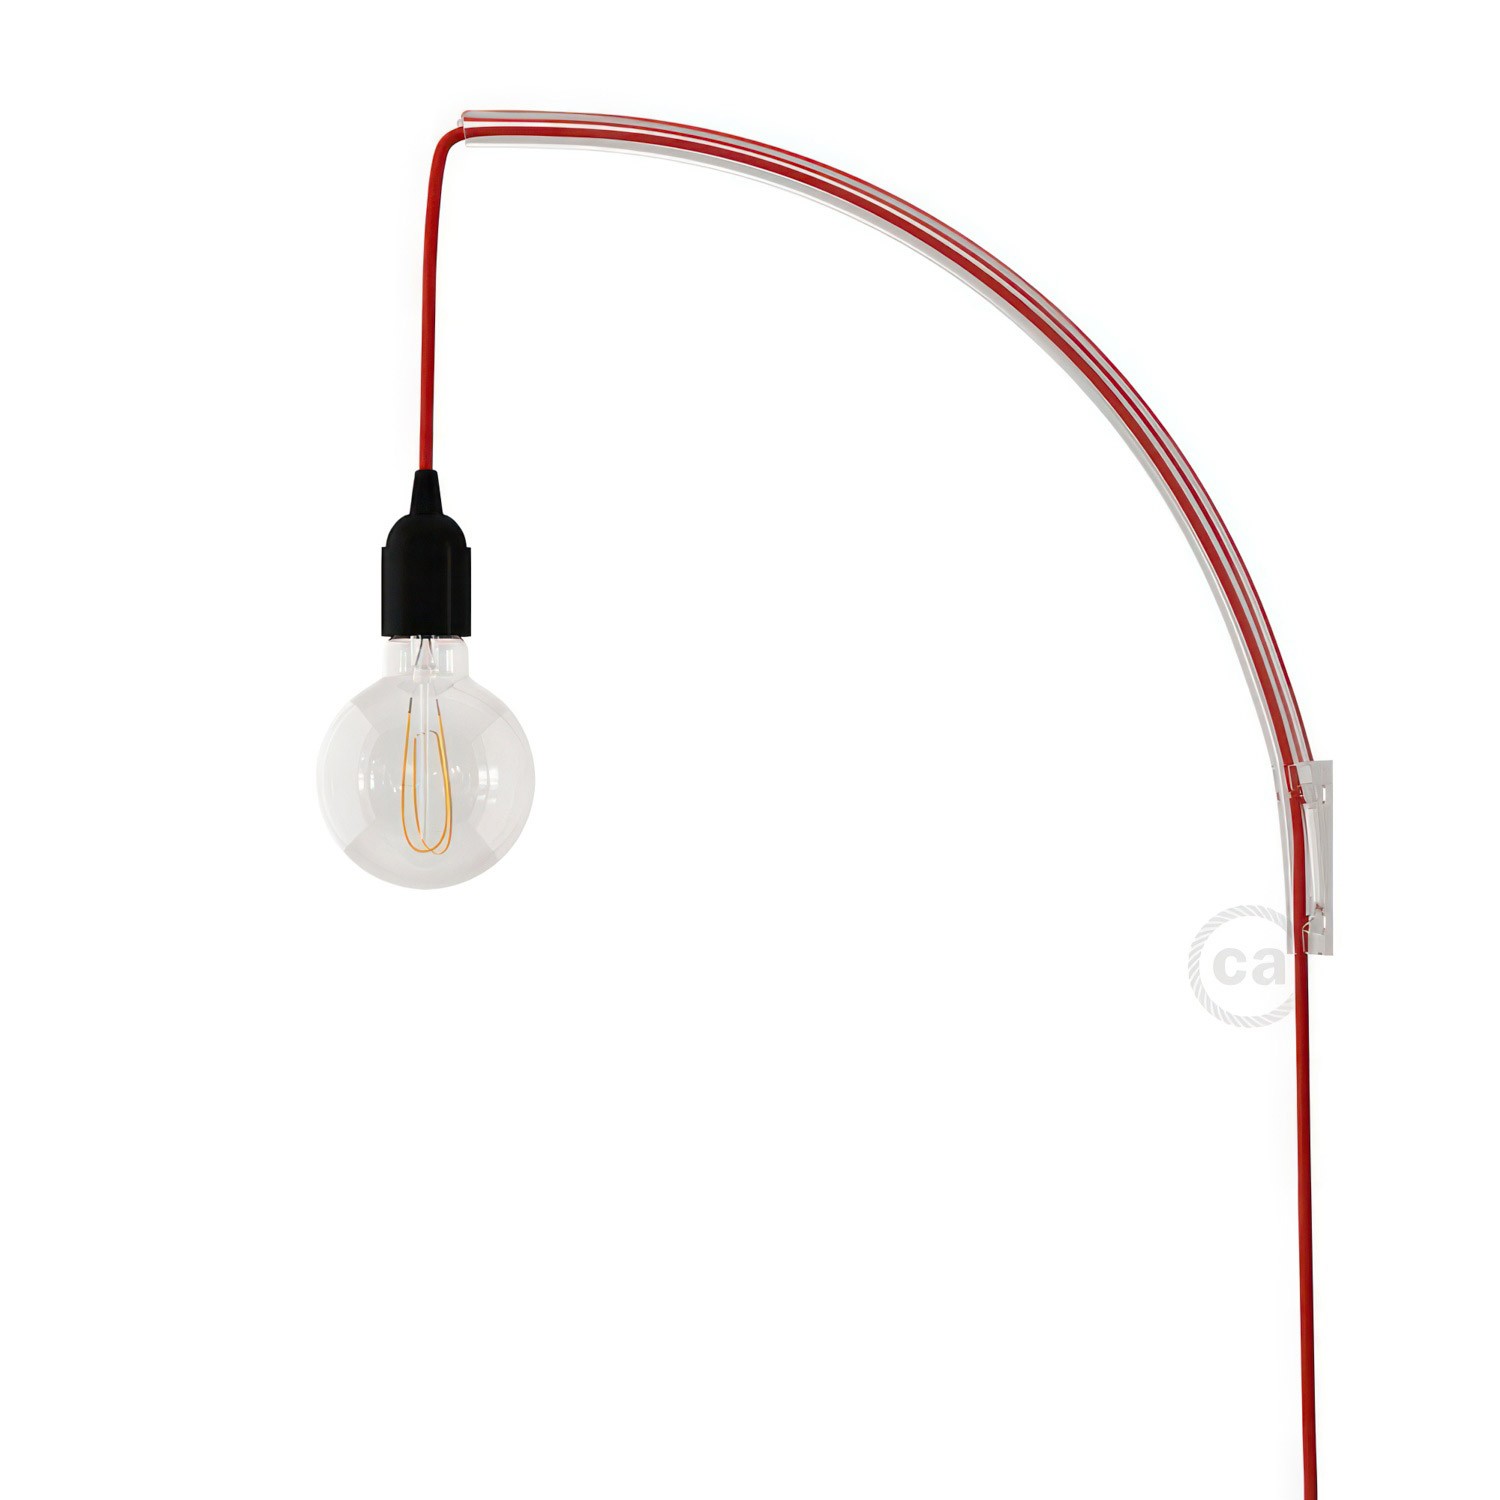 Archet(To), transparent wall mount for pendant lamps